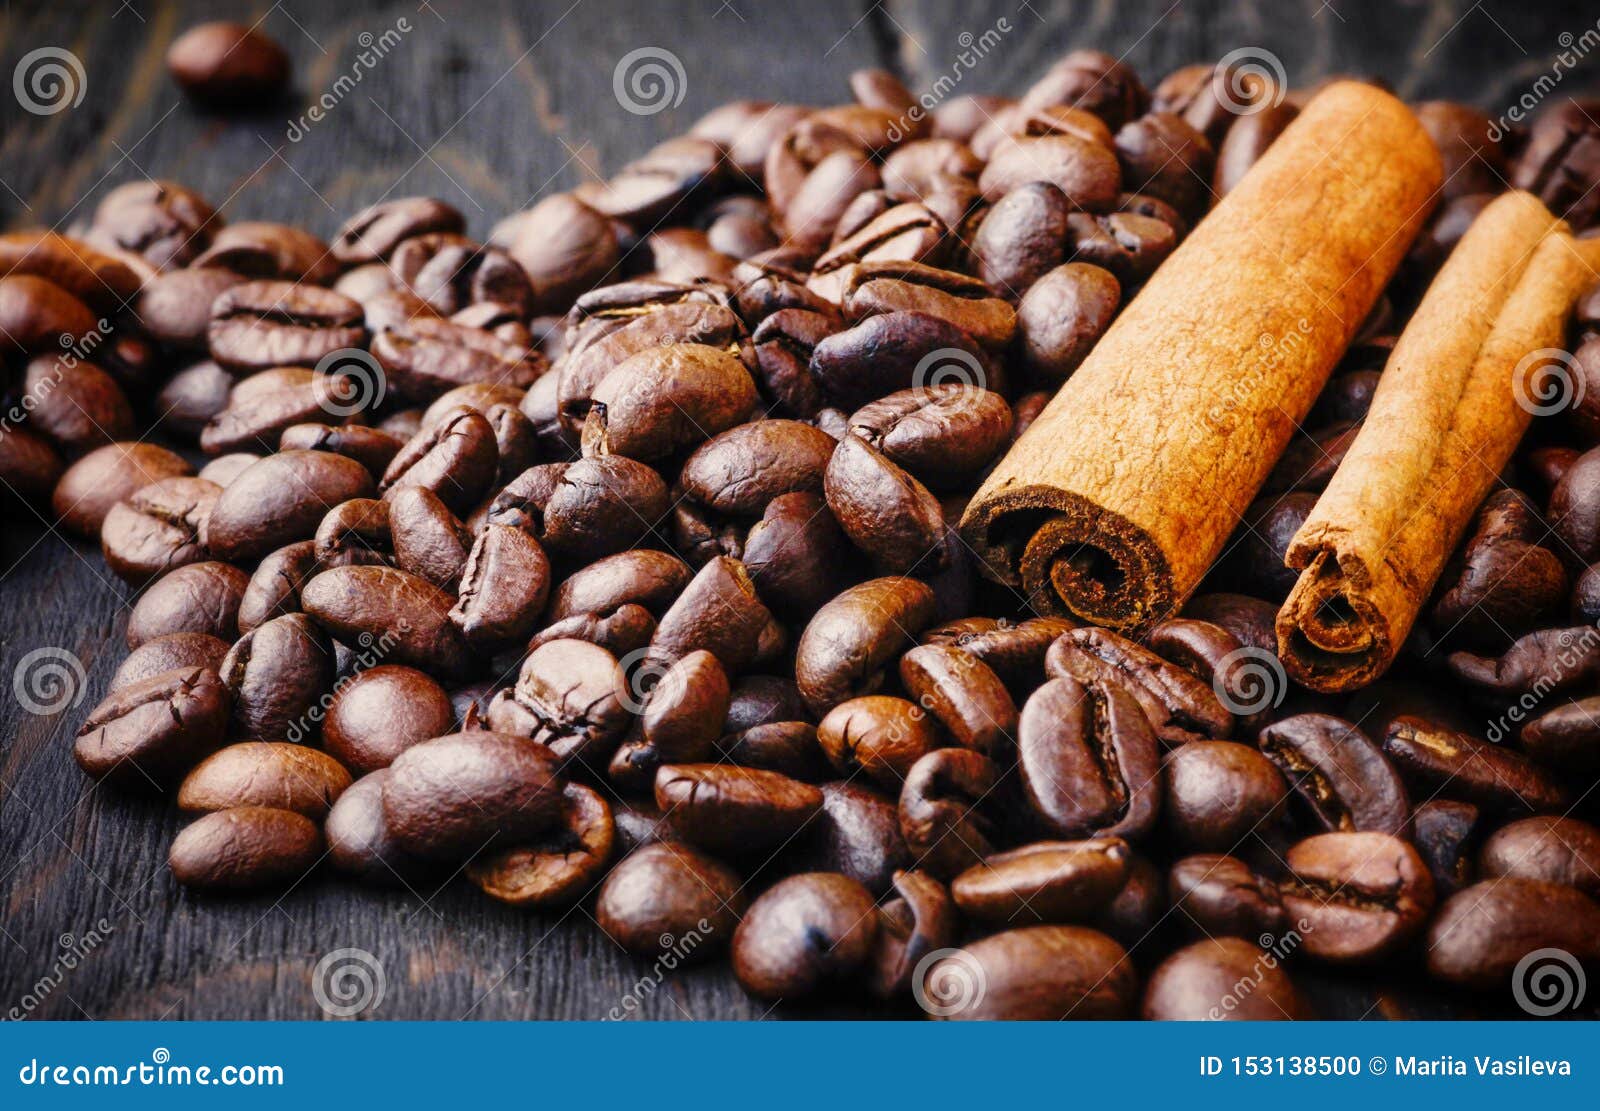 coffee beans,cinnamon sticks,aroma, coffee,natural, bean, spices, drink, food, brown, on wooden background